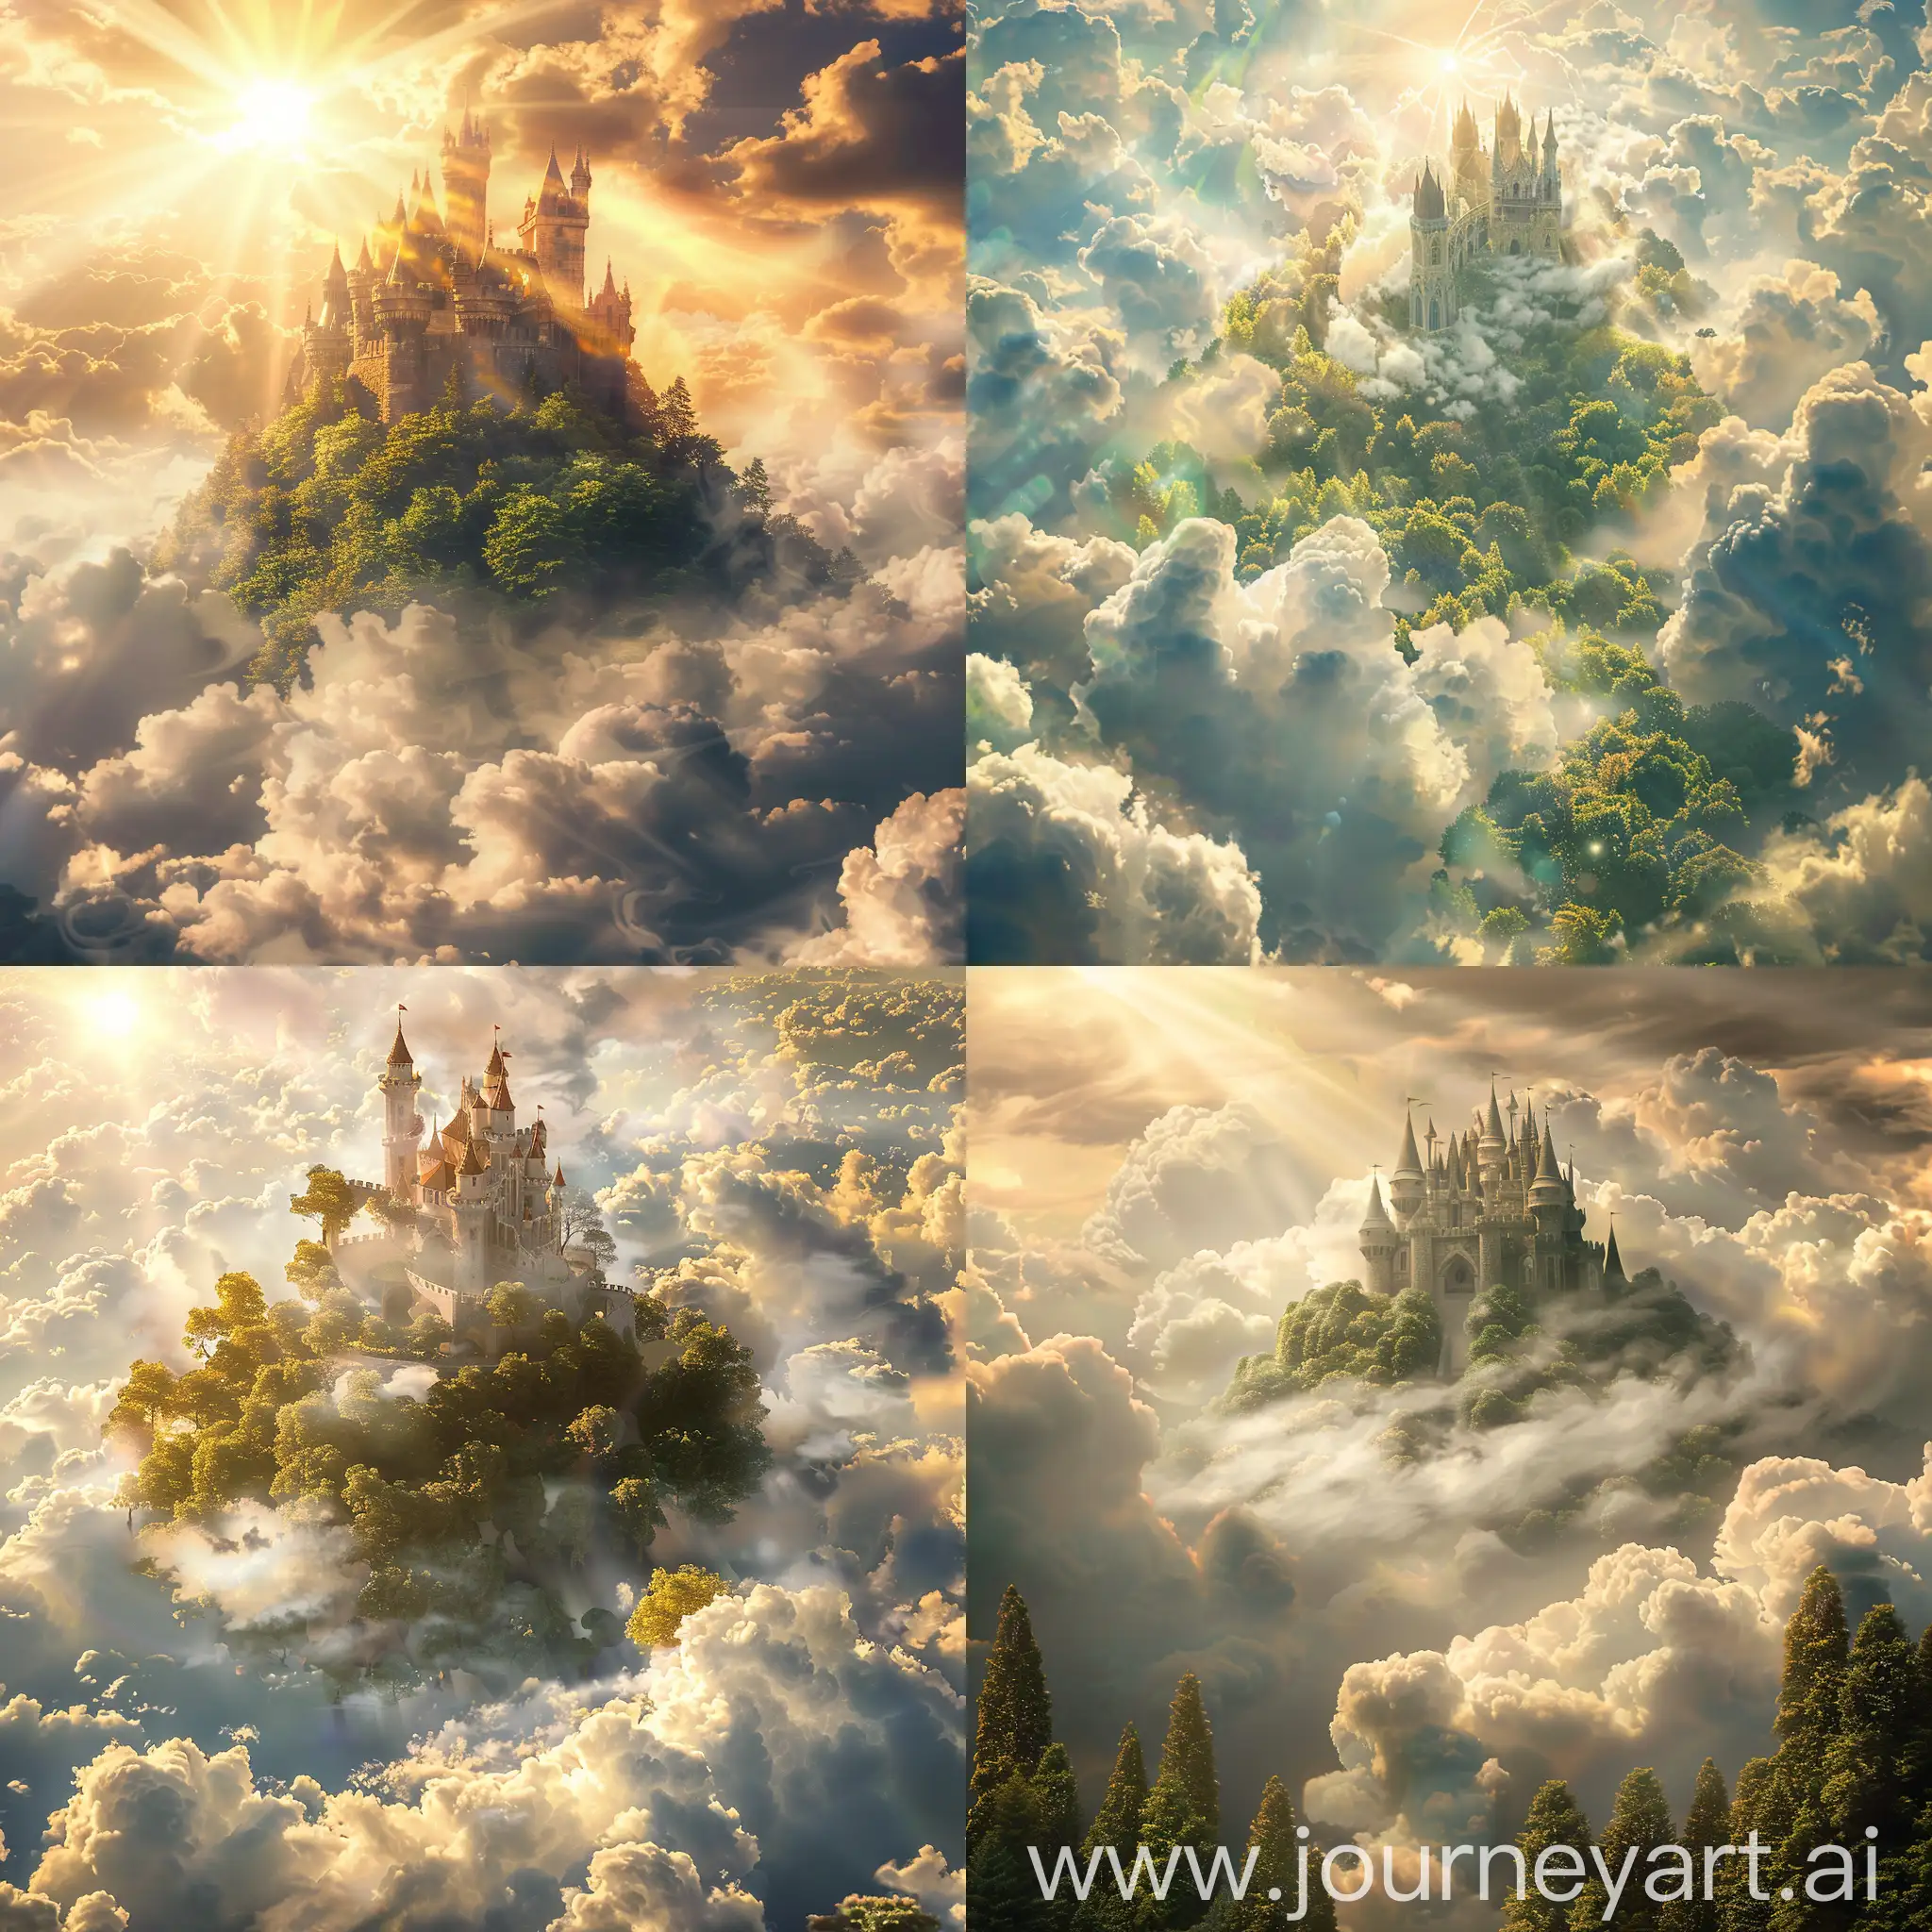 hyper realistic Bright sunlight windy day castle up in the clouds in the sky with lots of trees